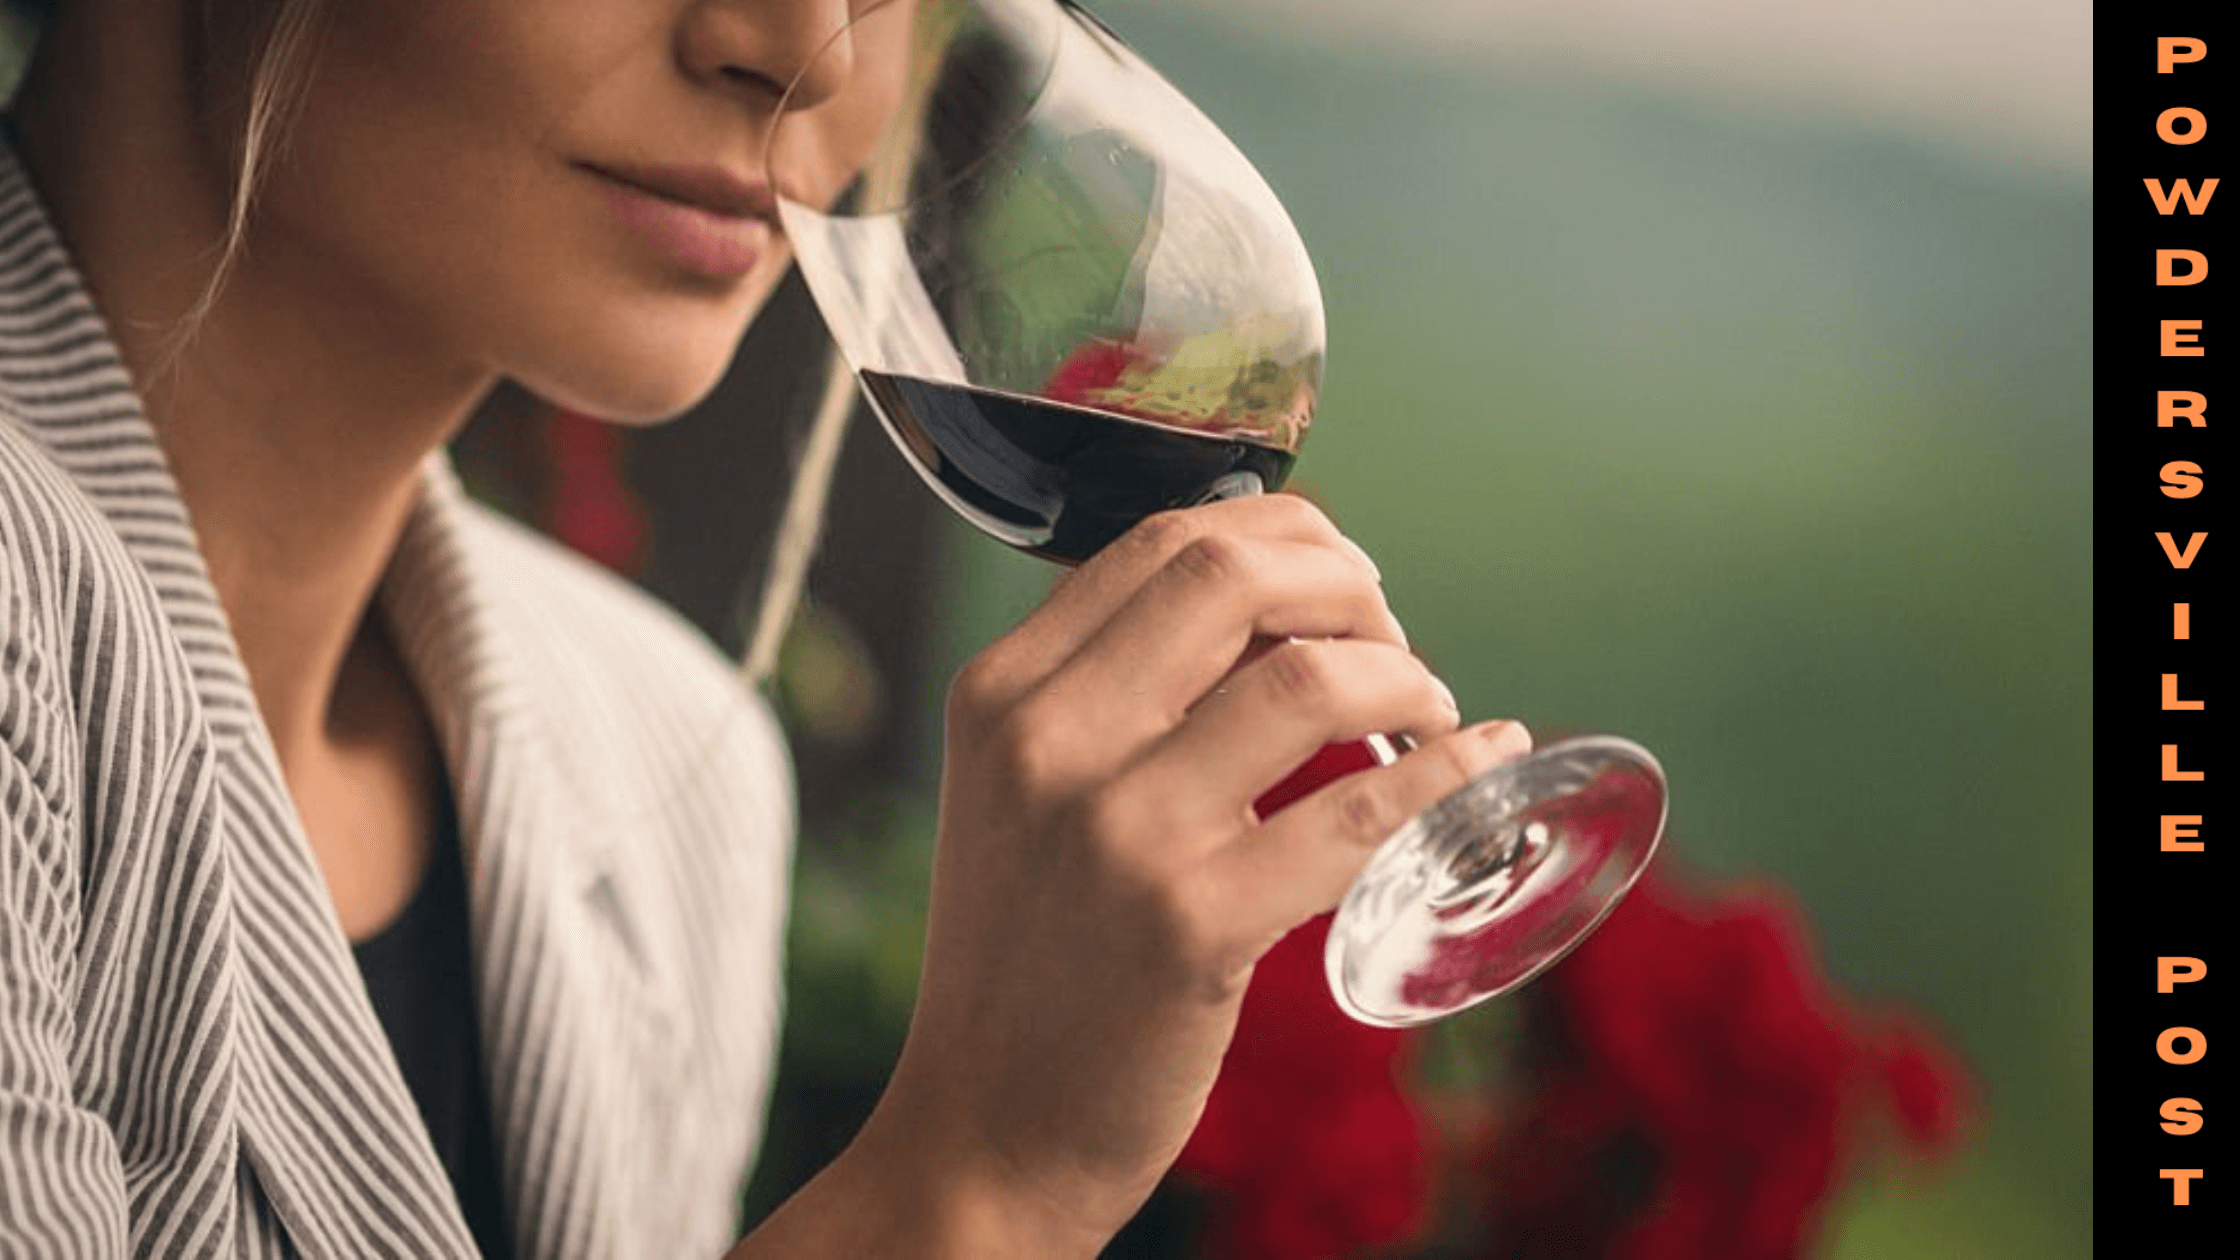 Drinking Wine With Meals May Lower The Risk Of Type 2 Diabetes